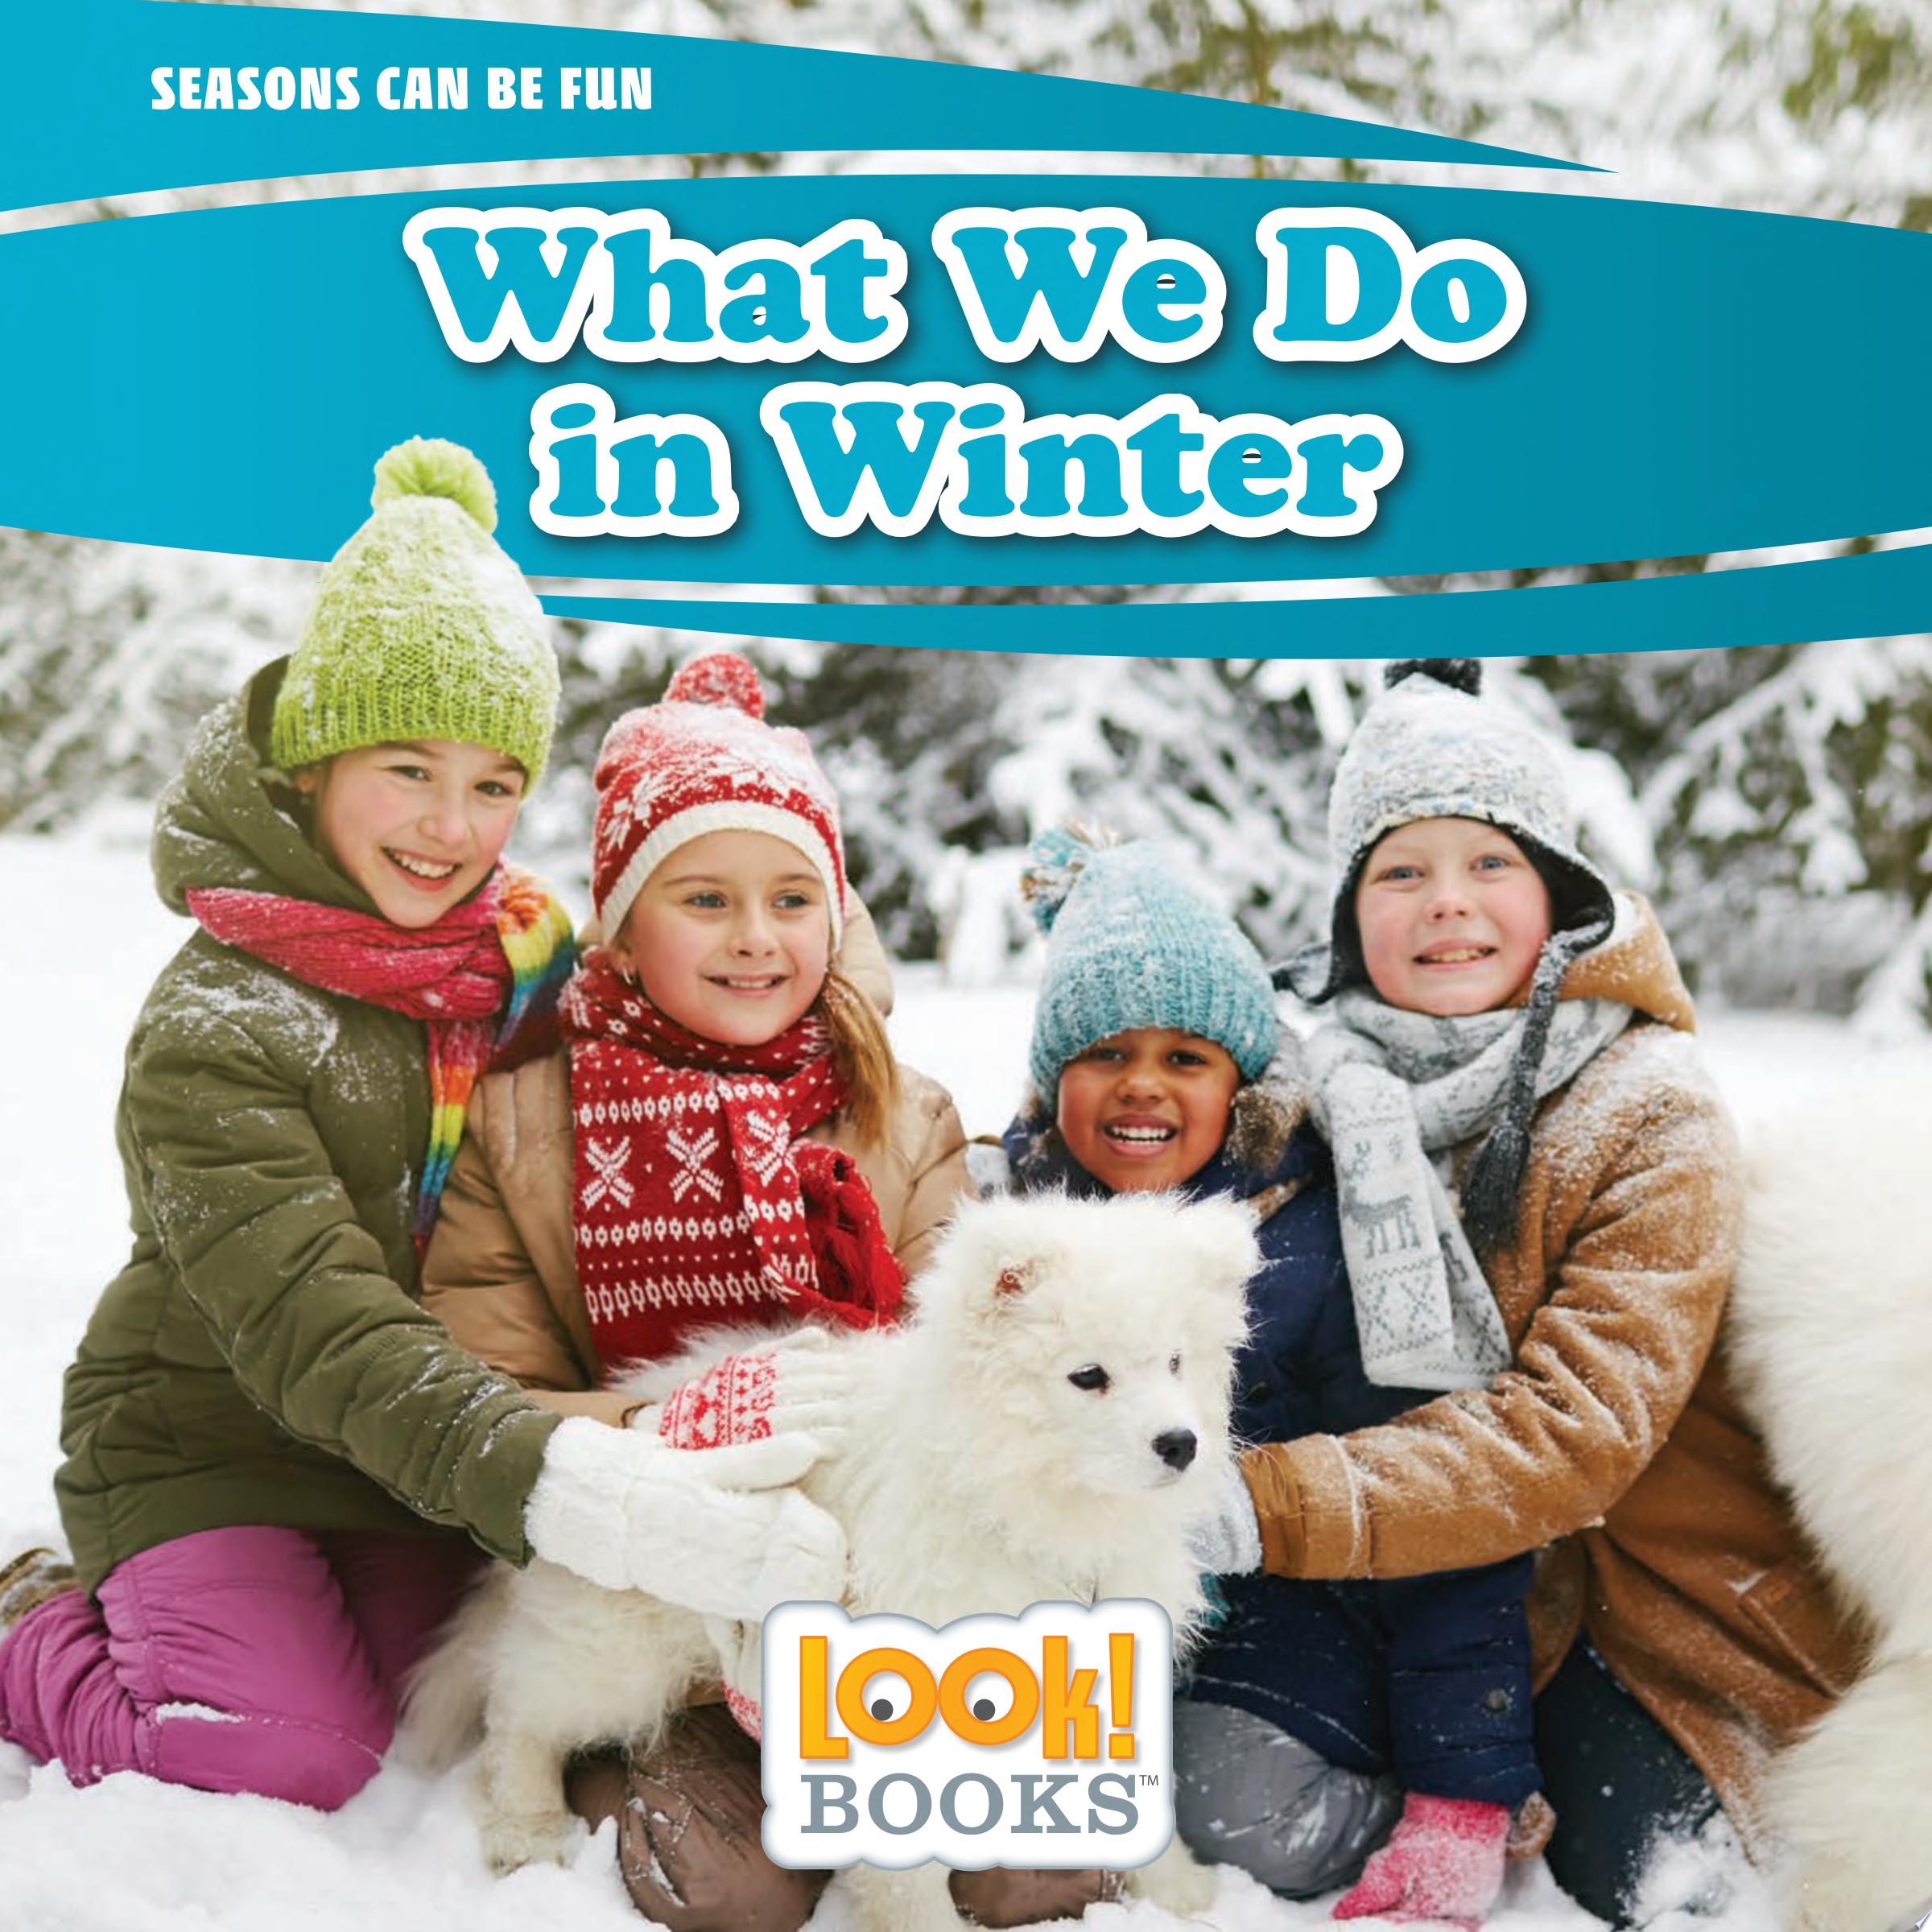 Image for "What We Do in Winter"